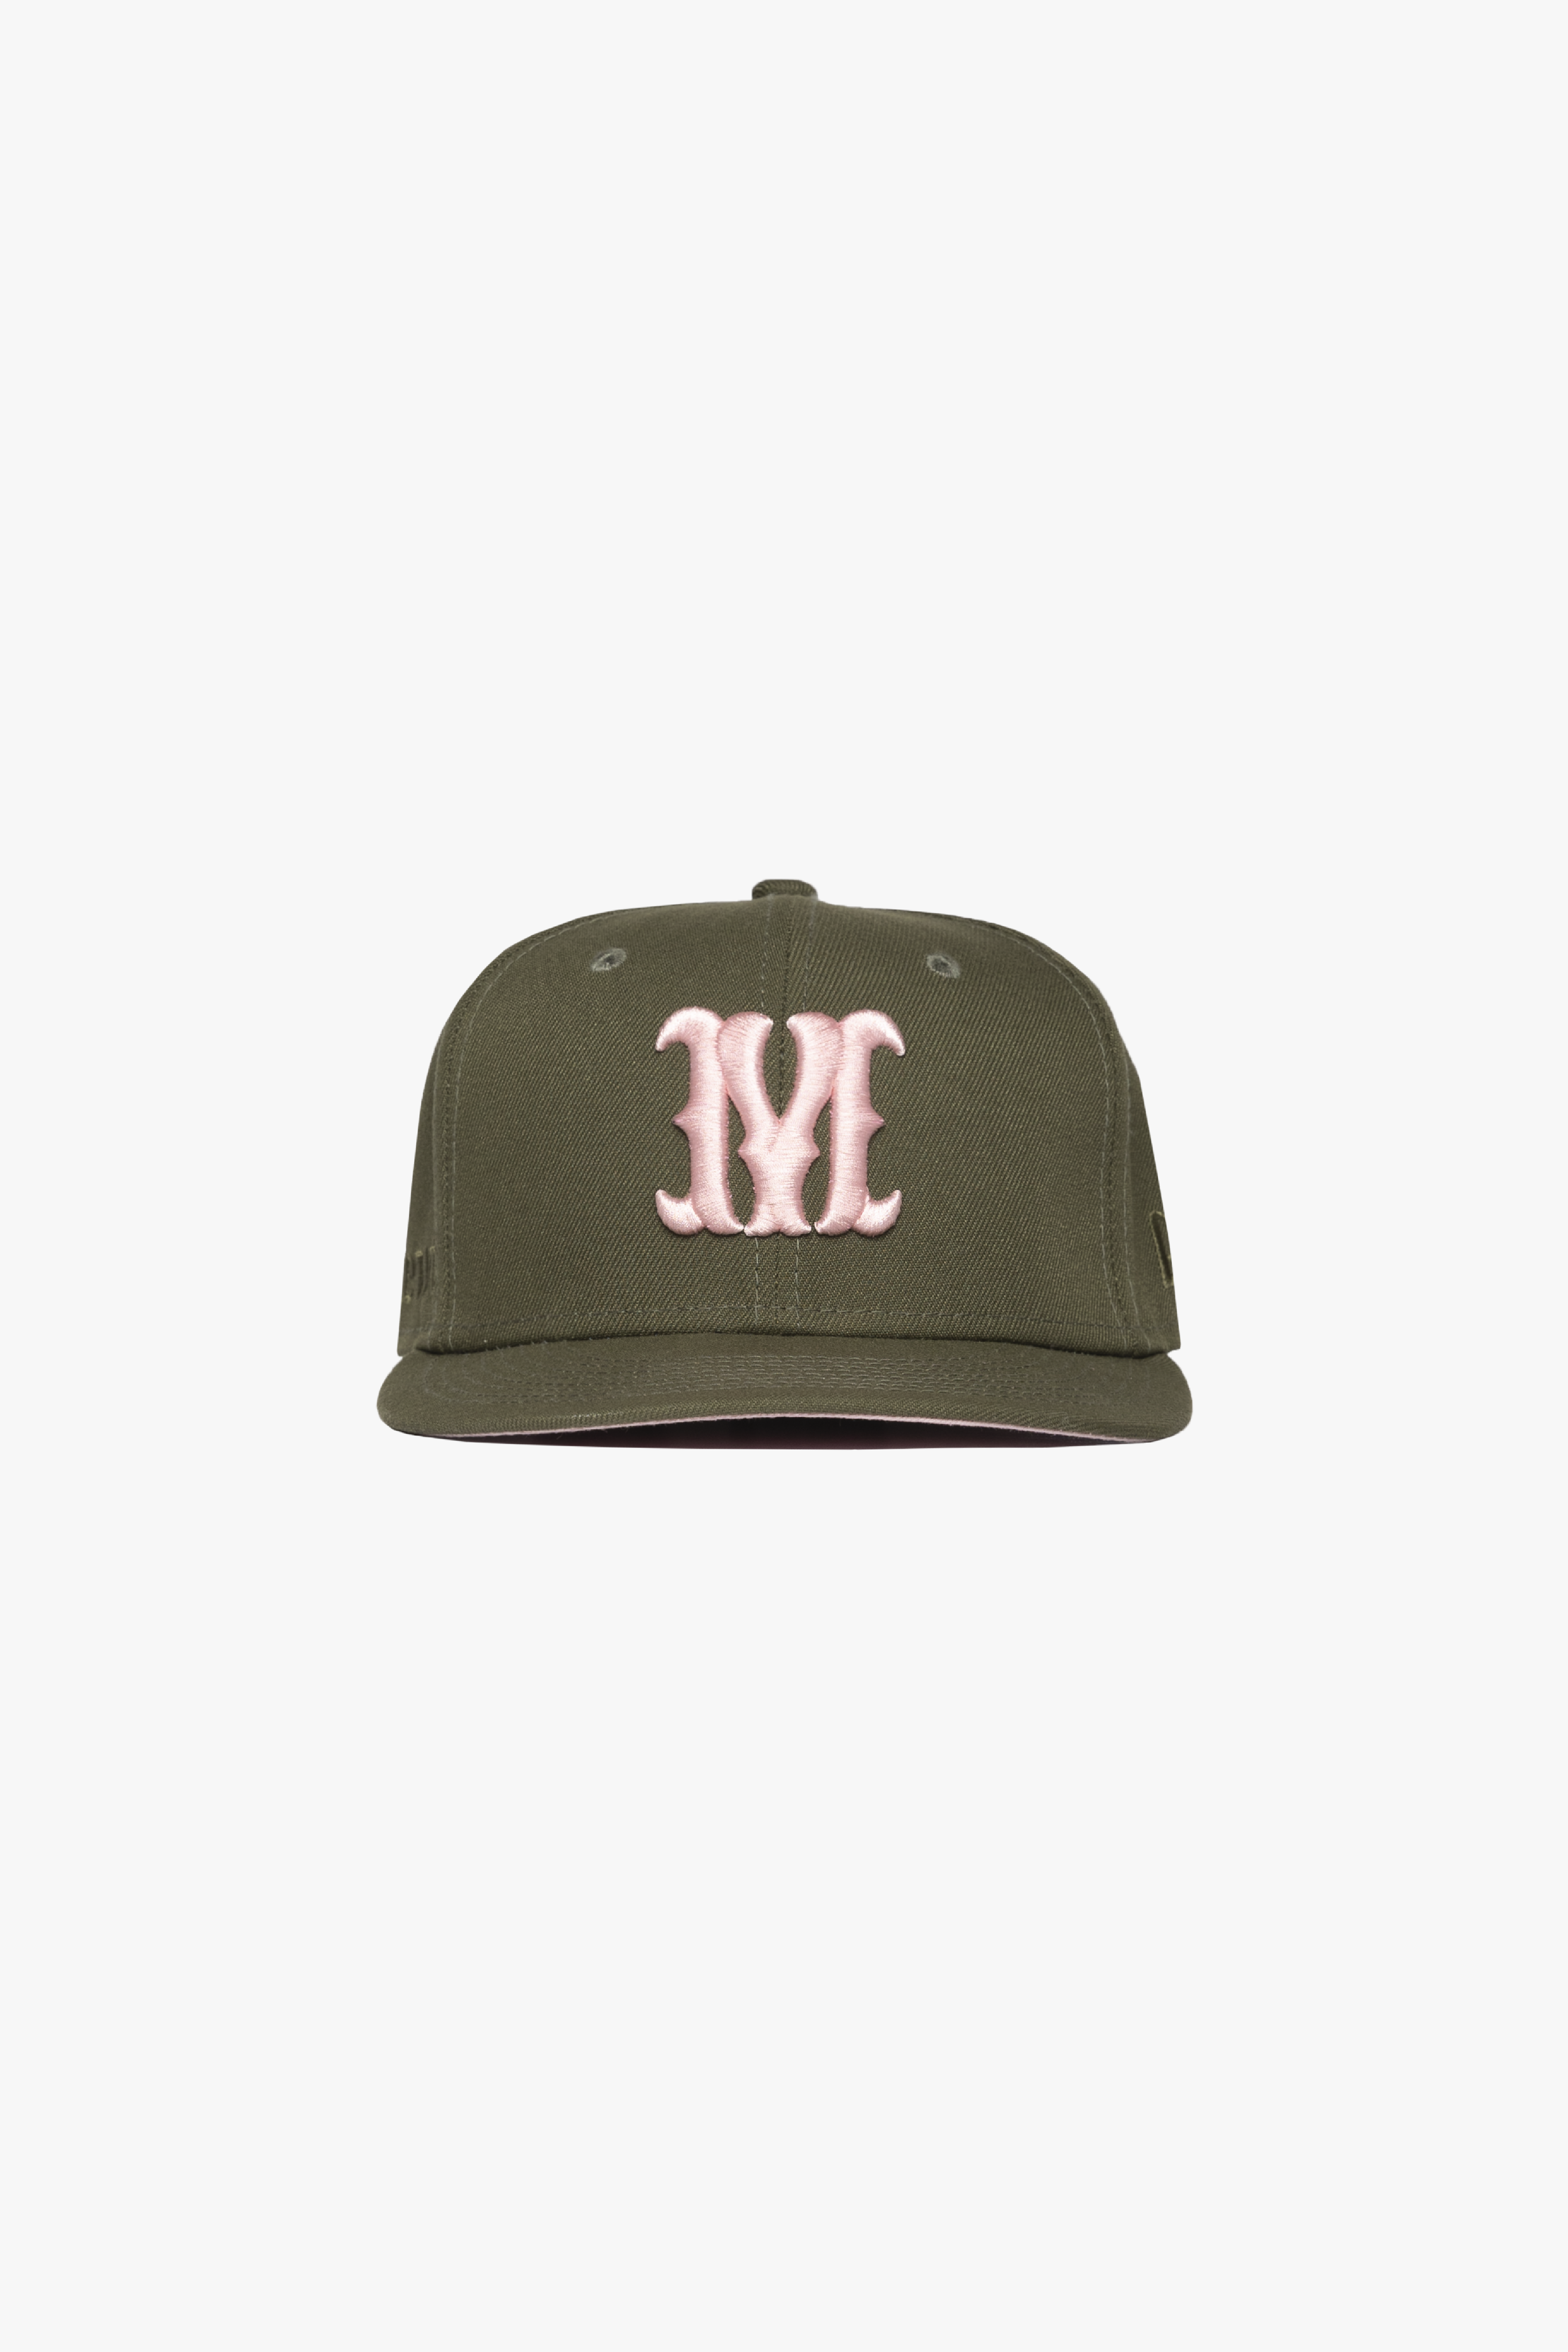 OLIVE MEWT NEW ERA 59FIFTY FITTED